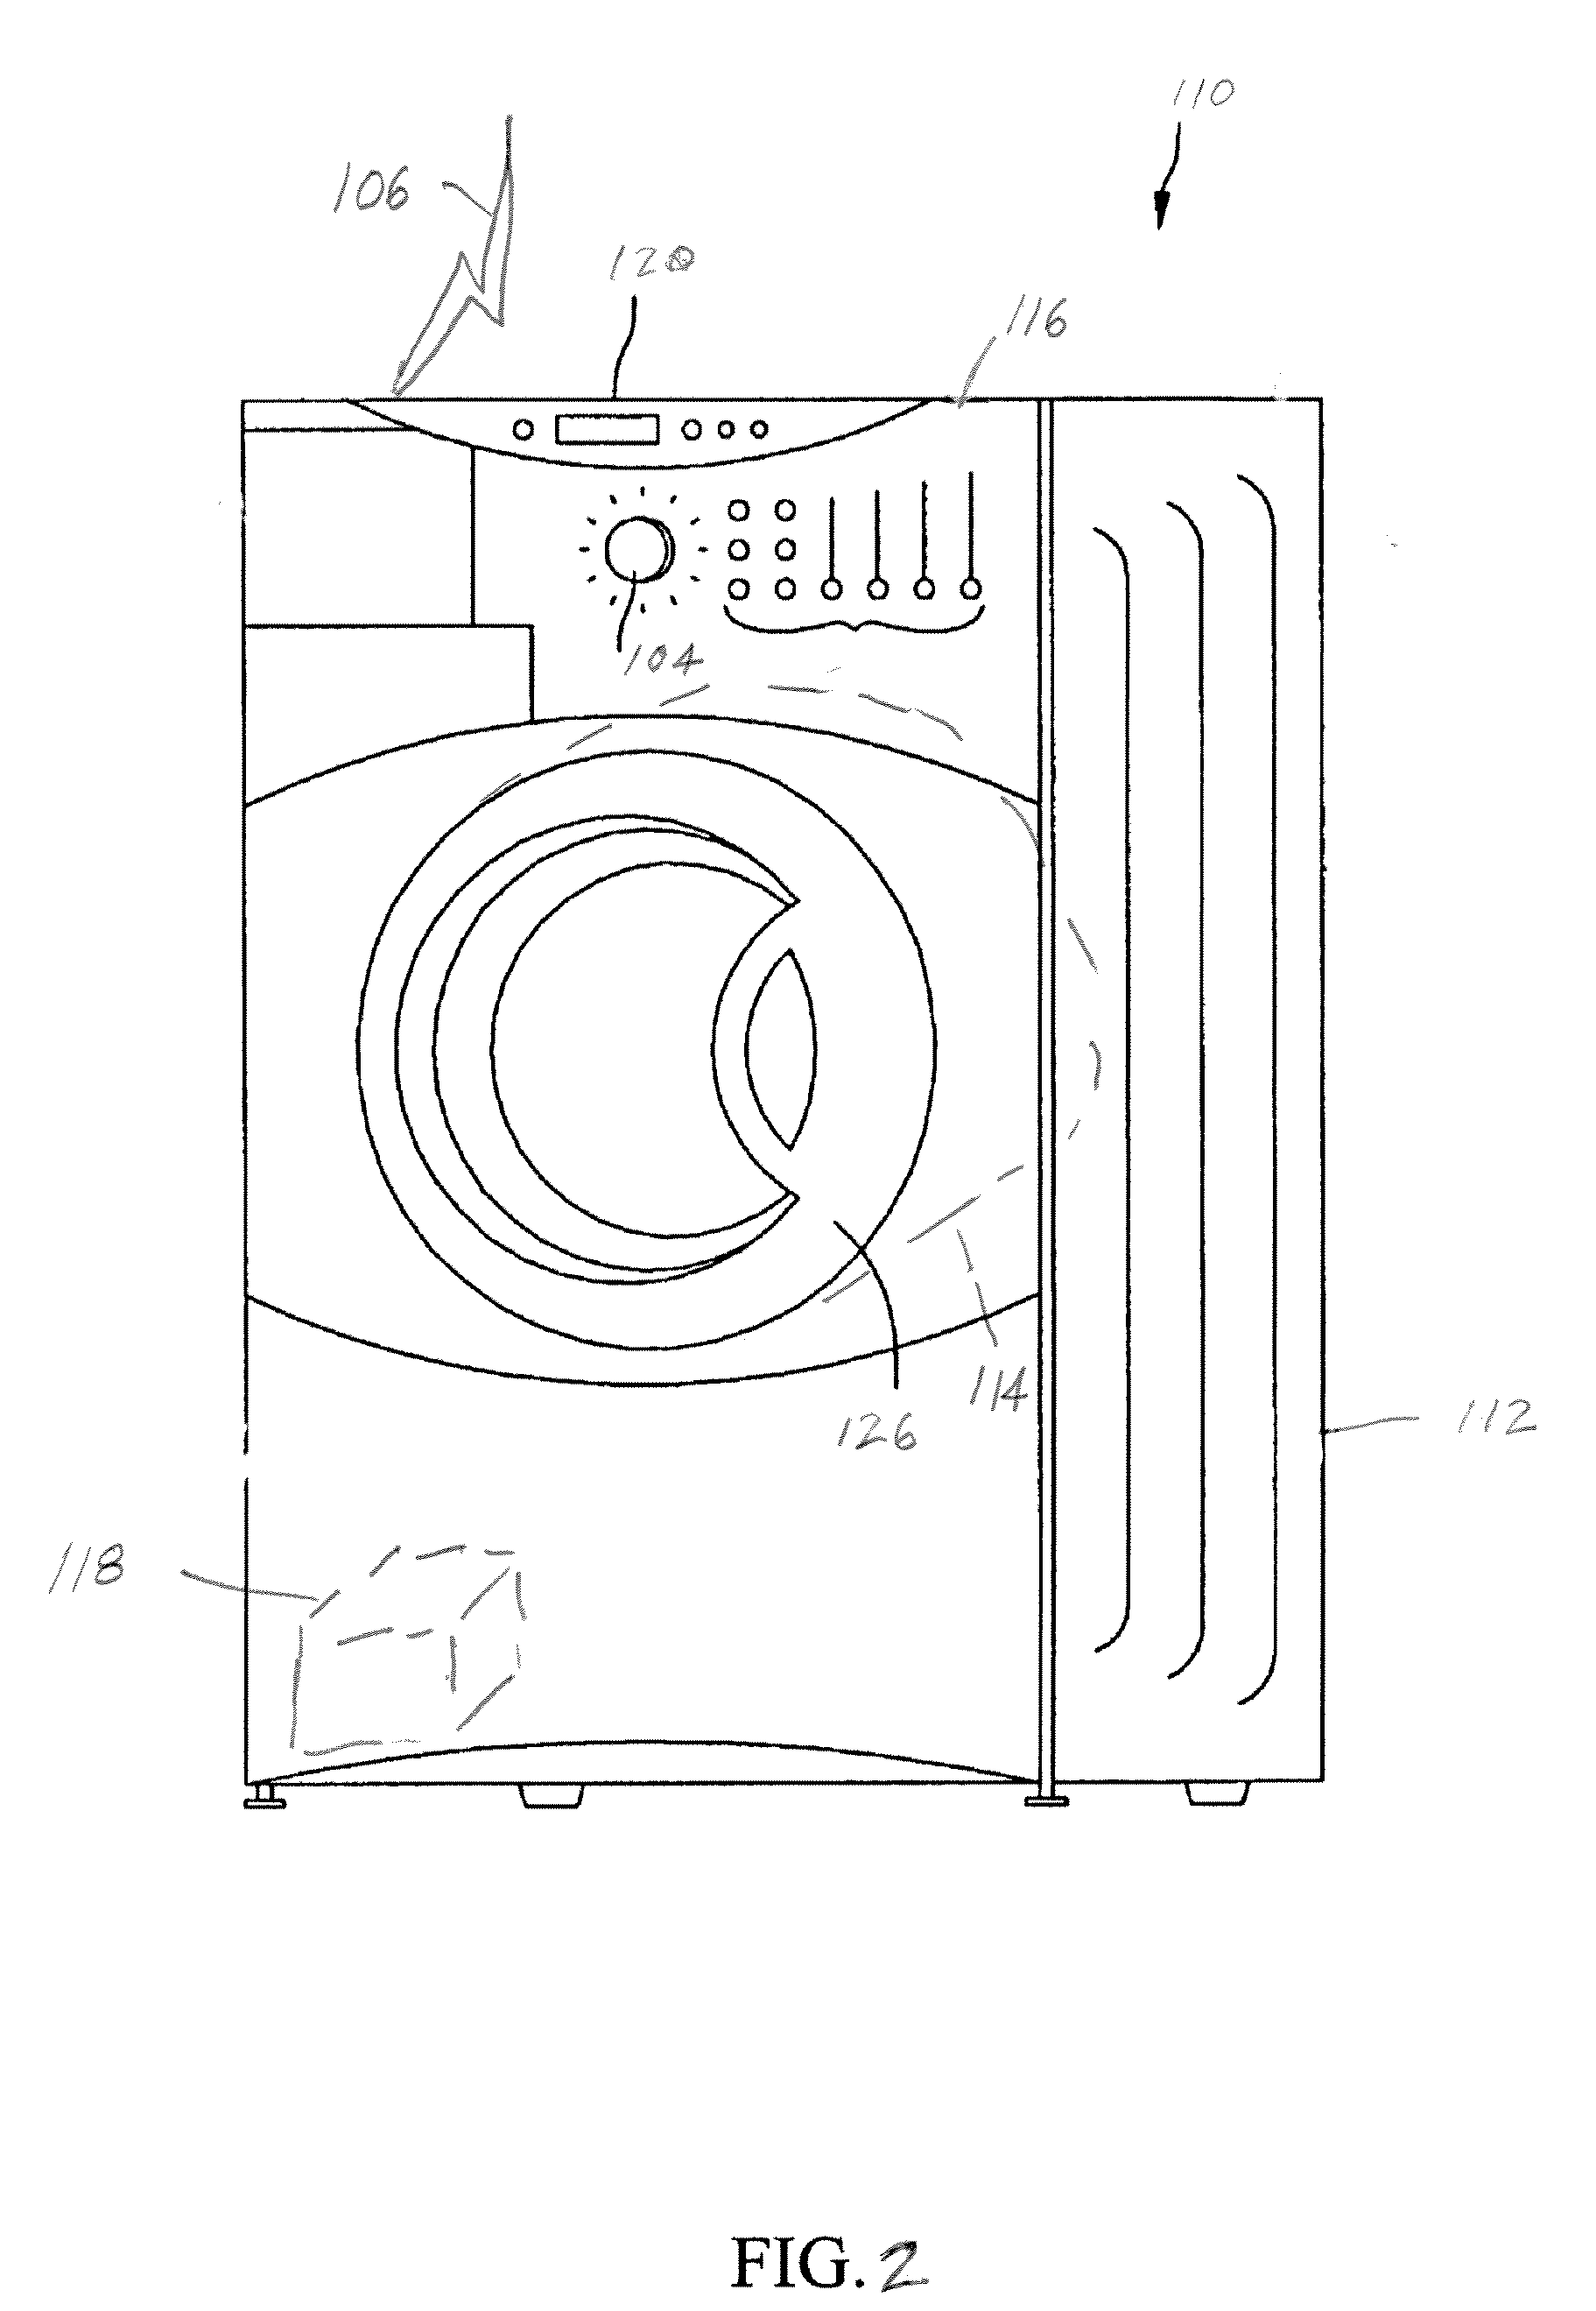 Clothes washer demand response with at least one additional spin cycle